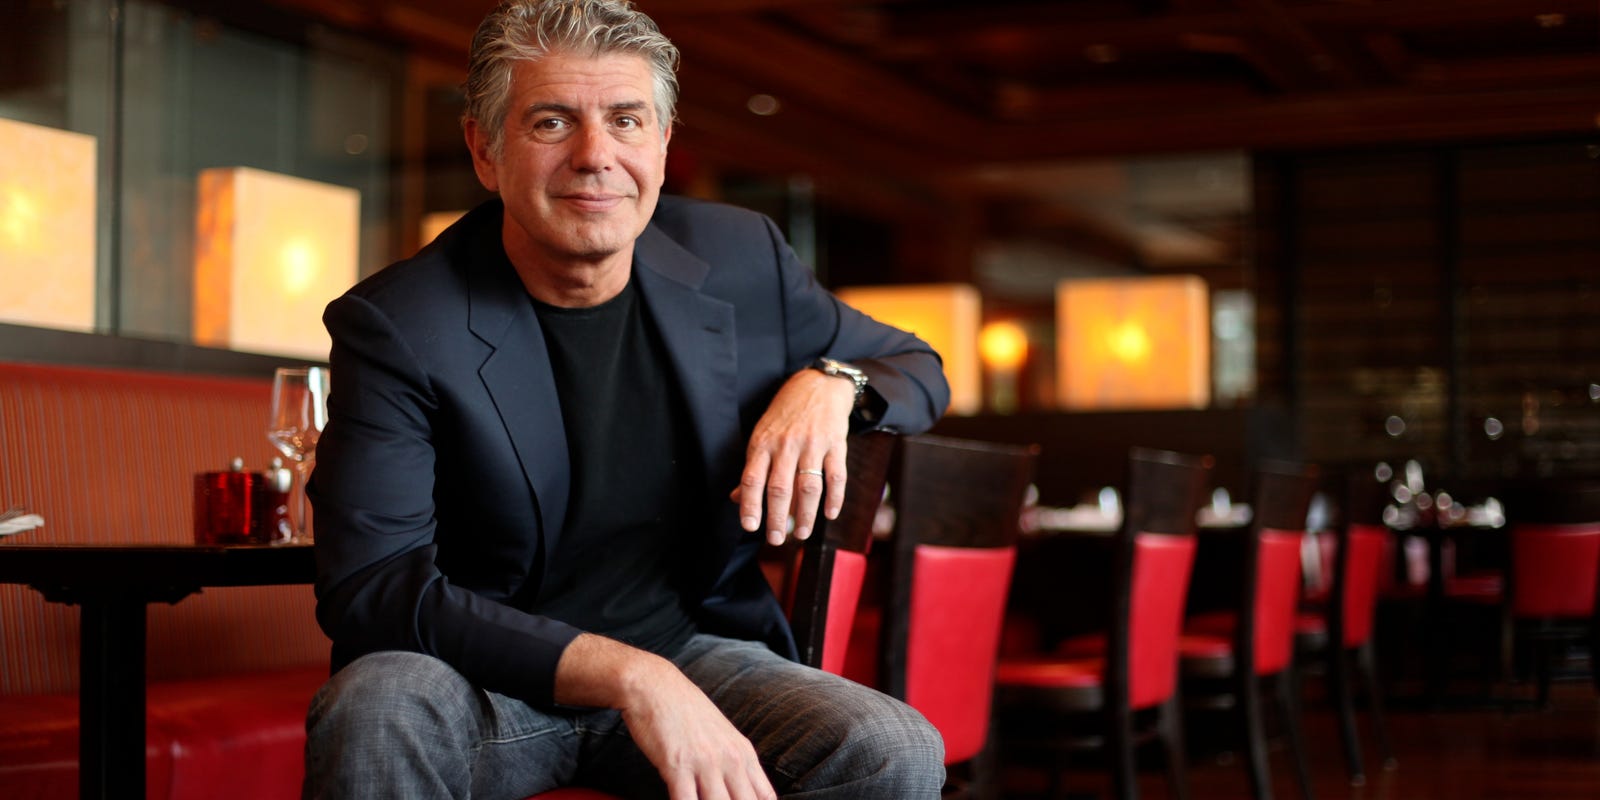 Lucy Fire Porn Crying - Anthony Bourdain, chef-turned-TV host, dies at 61: Reports